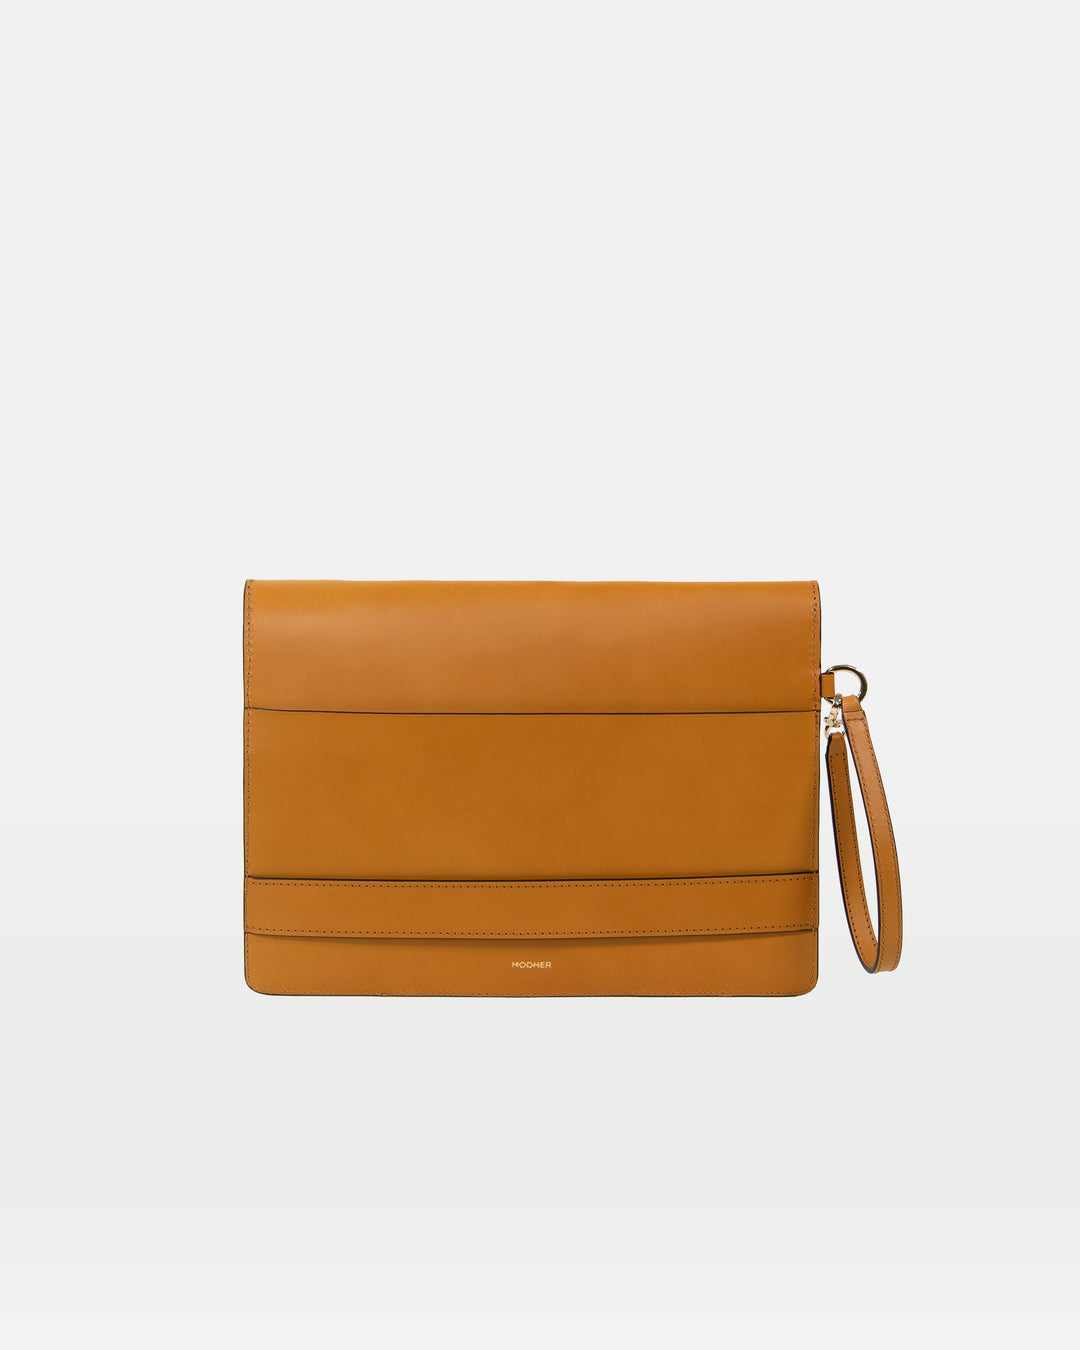 MODHER Envelope Clutch in Yellow malto vegetable tanned leather#color_yellow-malto